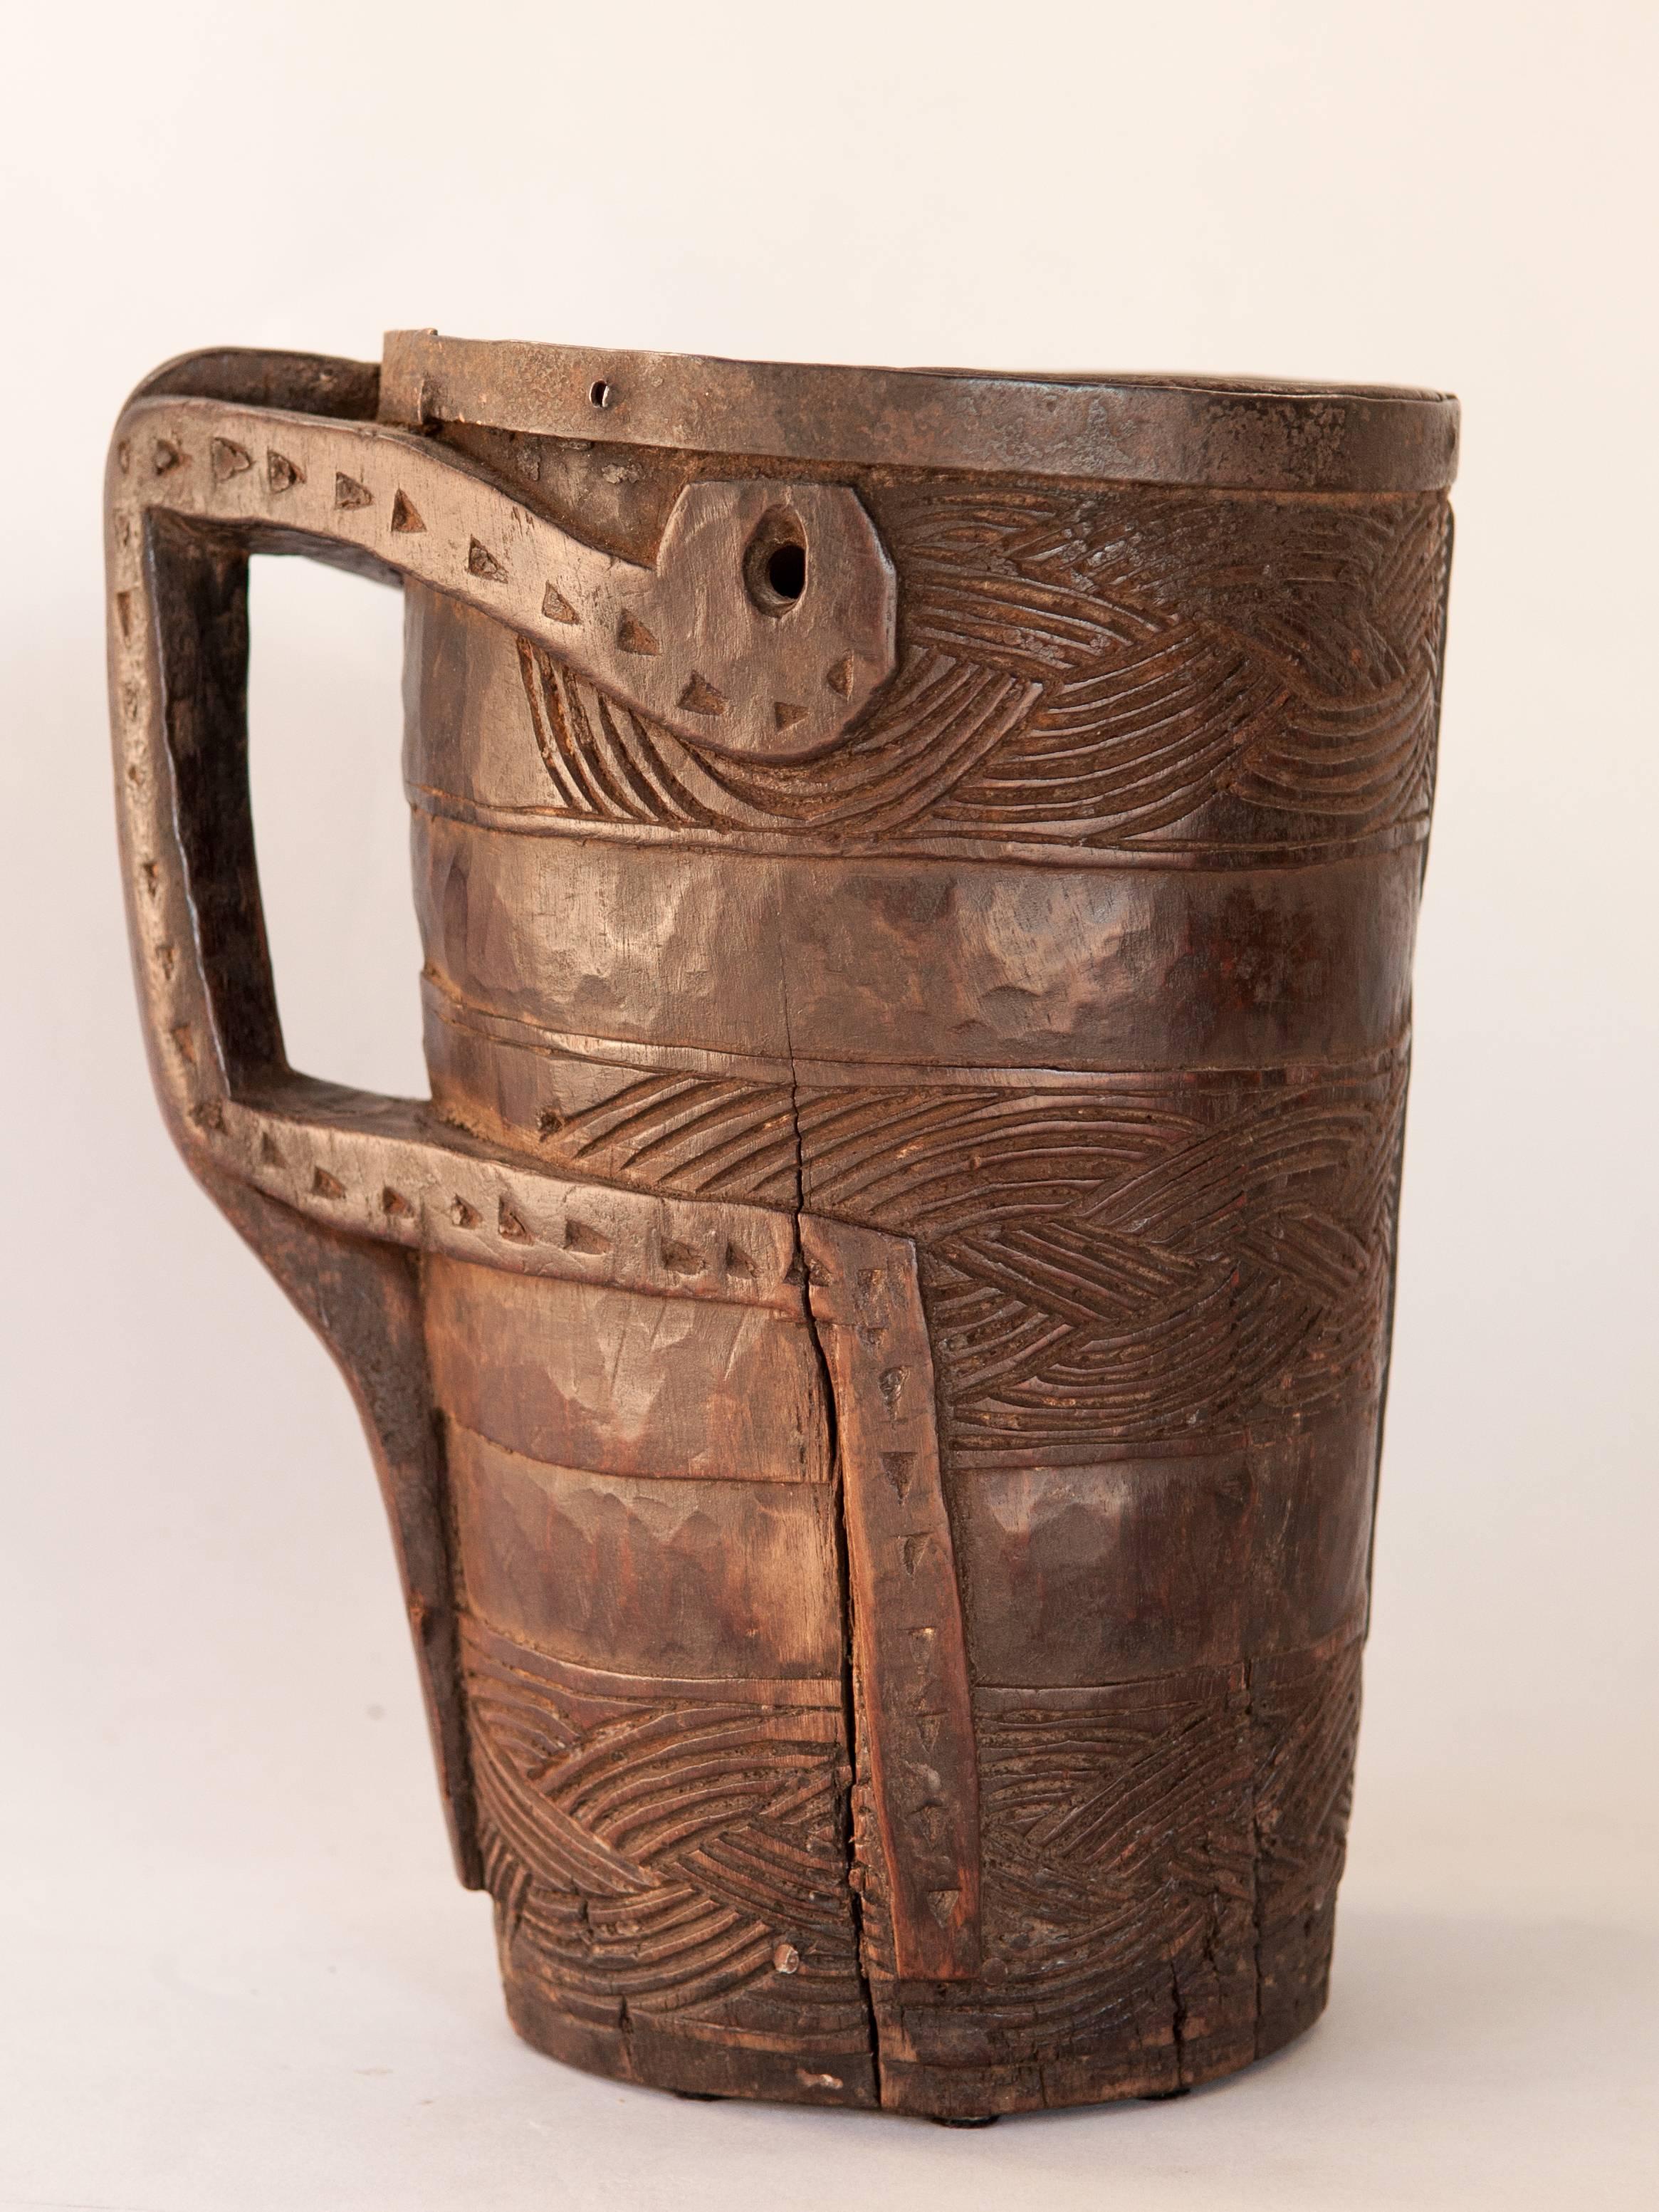 Wooden Carved Milk Pot with Stylized Monkey Motif. Late 20th Century. From the Middle Hills of West Nepal.
This rustic milk pot was hand carved of local hardwood in the middle hills of western Nepal,  using very basic tools. Geometric designs adorn